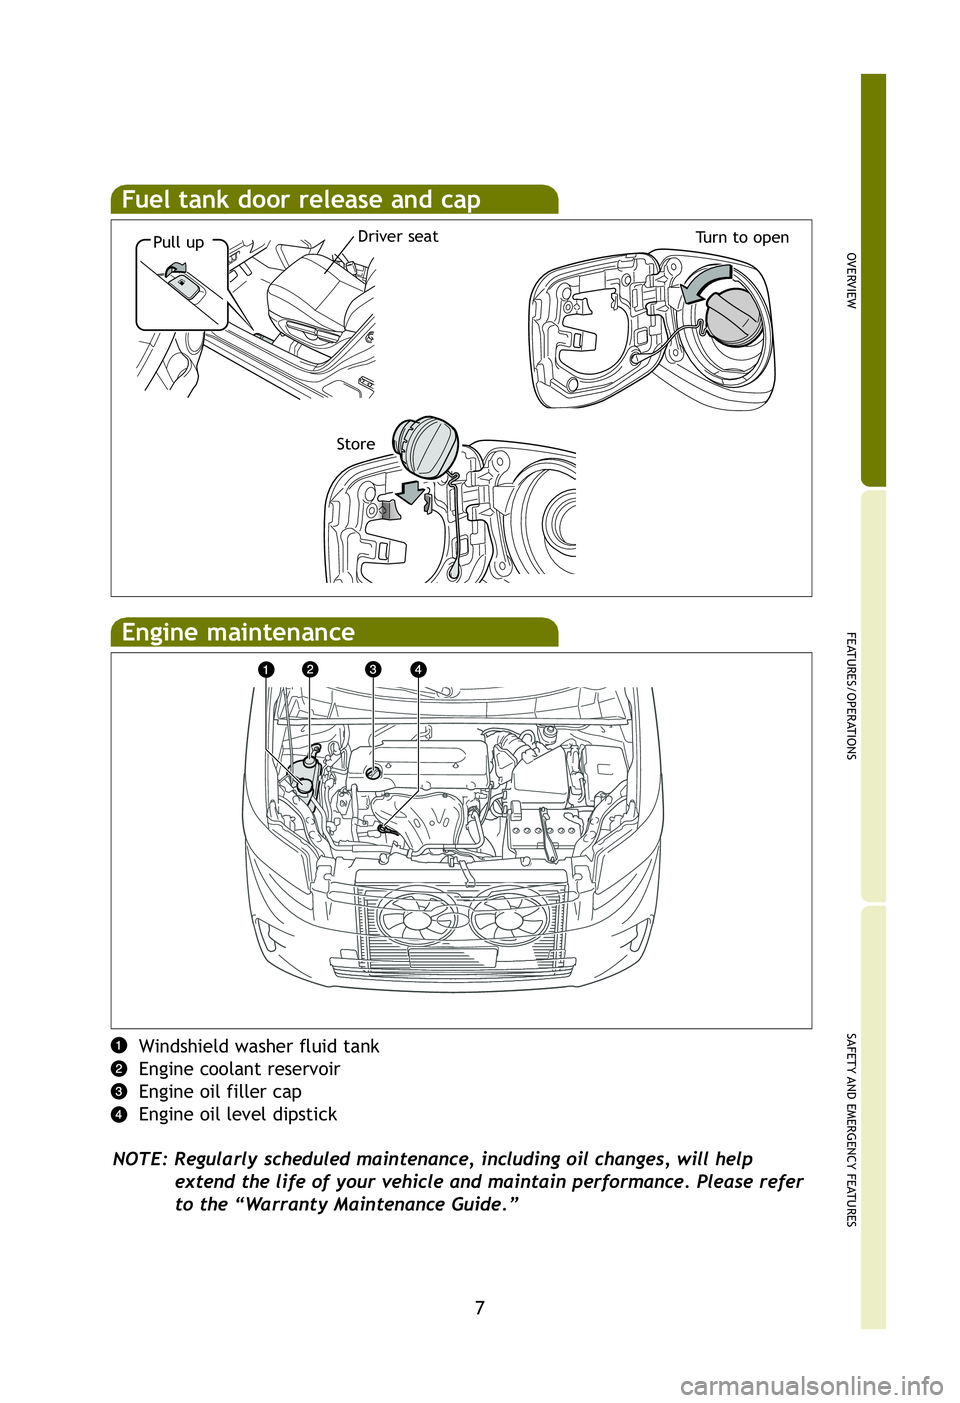 TOYOTA xB 2012  Owners Manual (in English) OVERVIEW
FEATURES/OPERATIONS
SAFETY AND EMERGENCY FEATURES
7
n 60
Fuel tank door release and cap
Pull upTurn to open
Windshield washer fluid tank
Engine coolant reservoir
Engine oil filler cap
Engine 